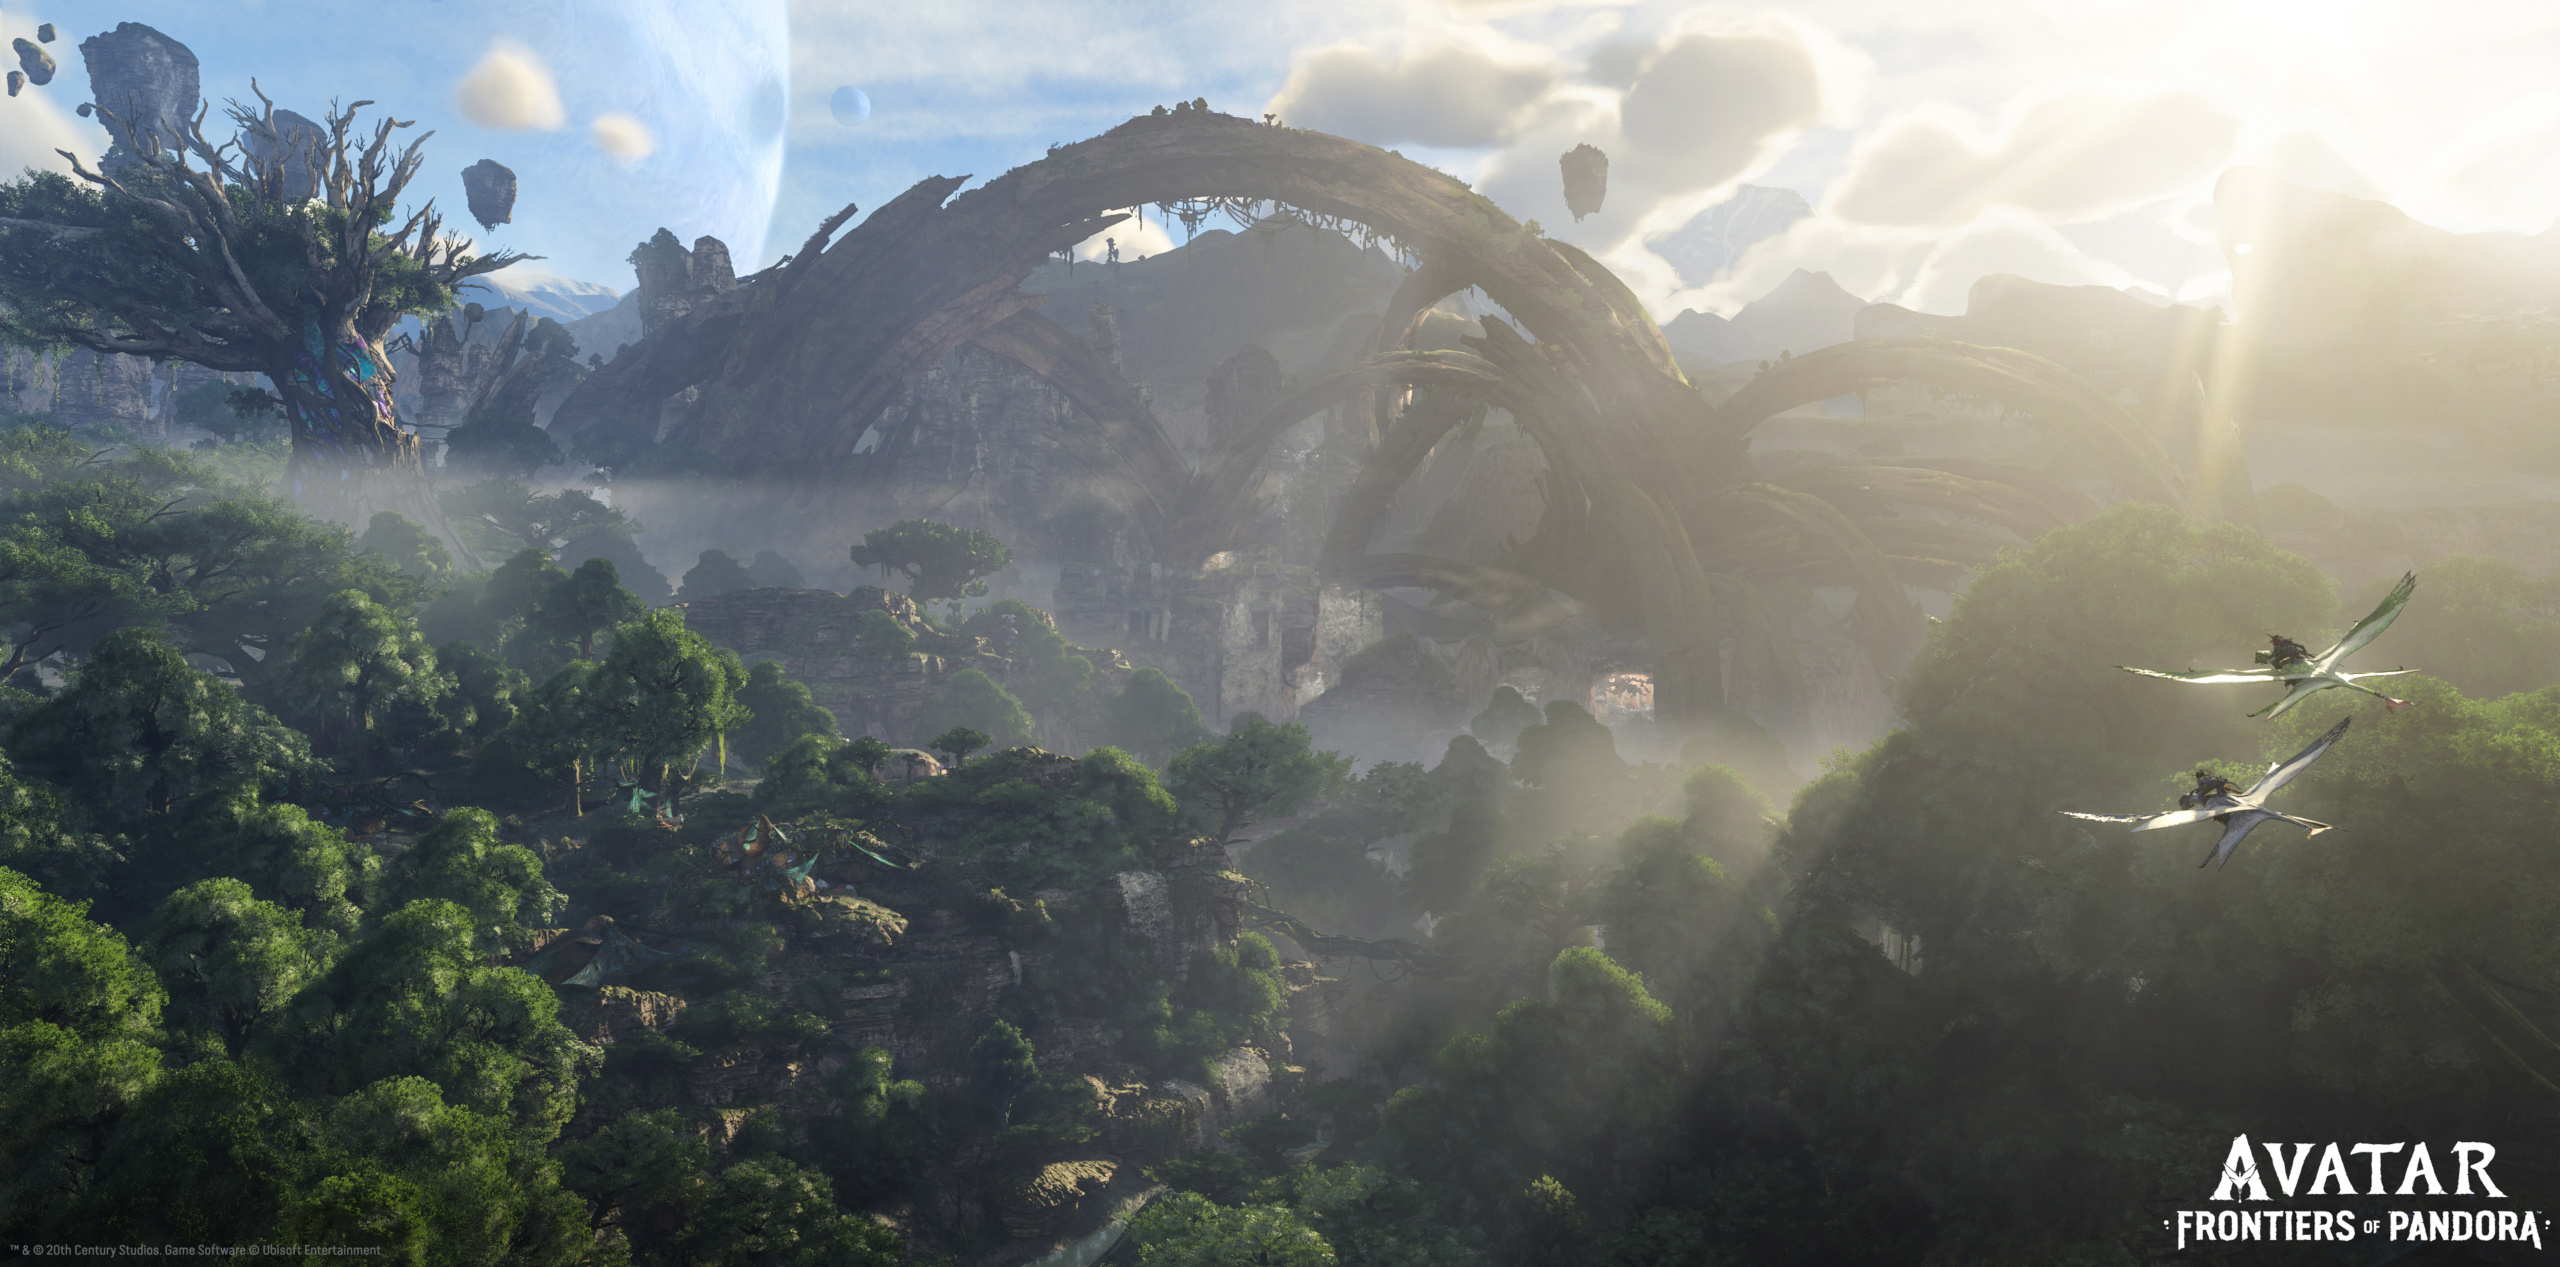 Avatar: Frontiers of Pandora: New-gen tech, Detailed environment, Open world of Na'vi race, Ambitious game. 2560x1270 Dual Screen Background.